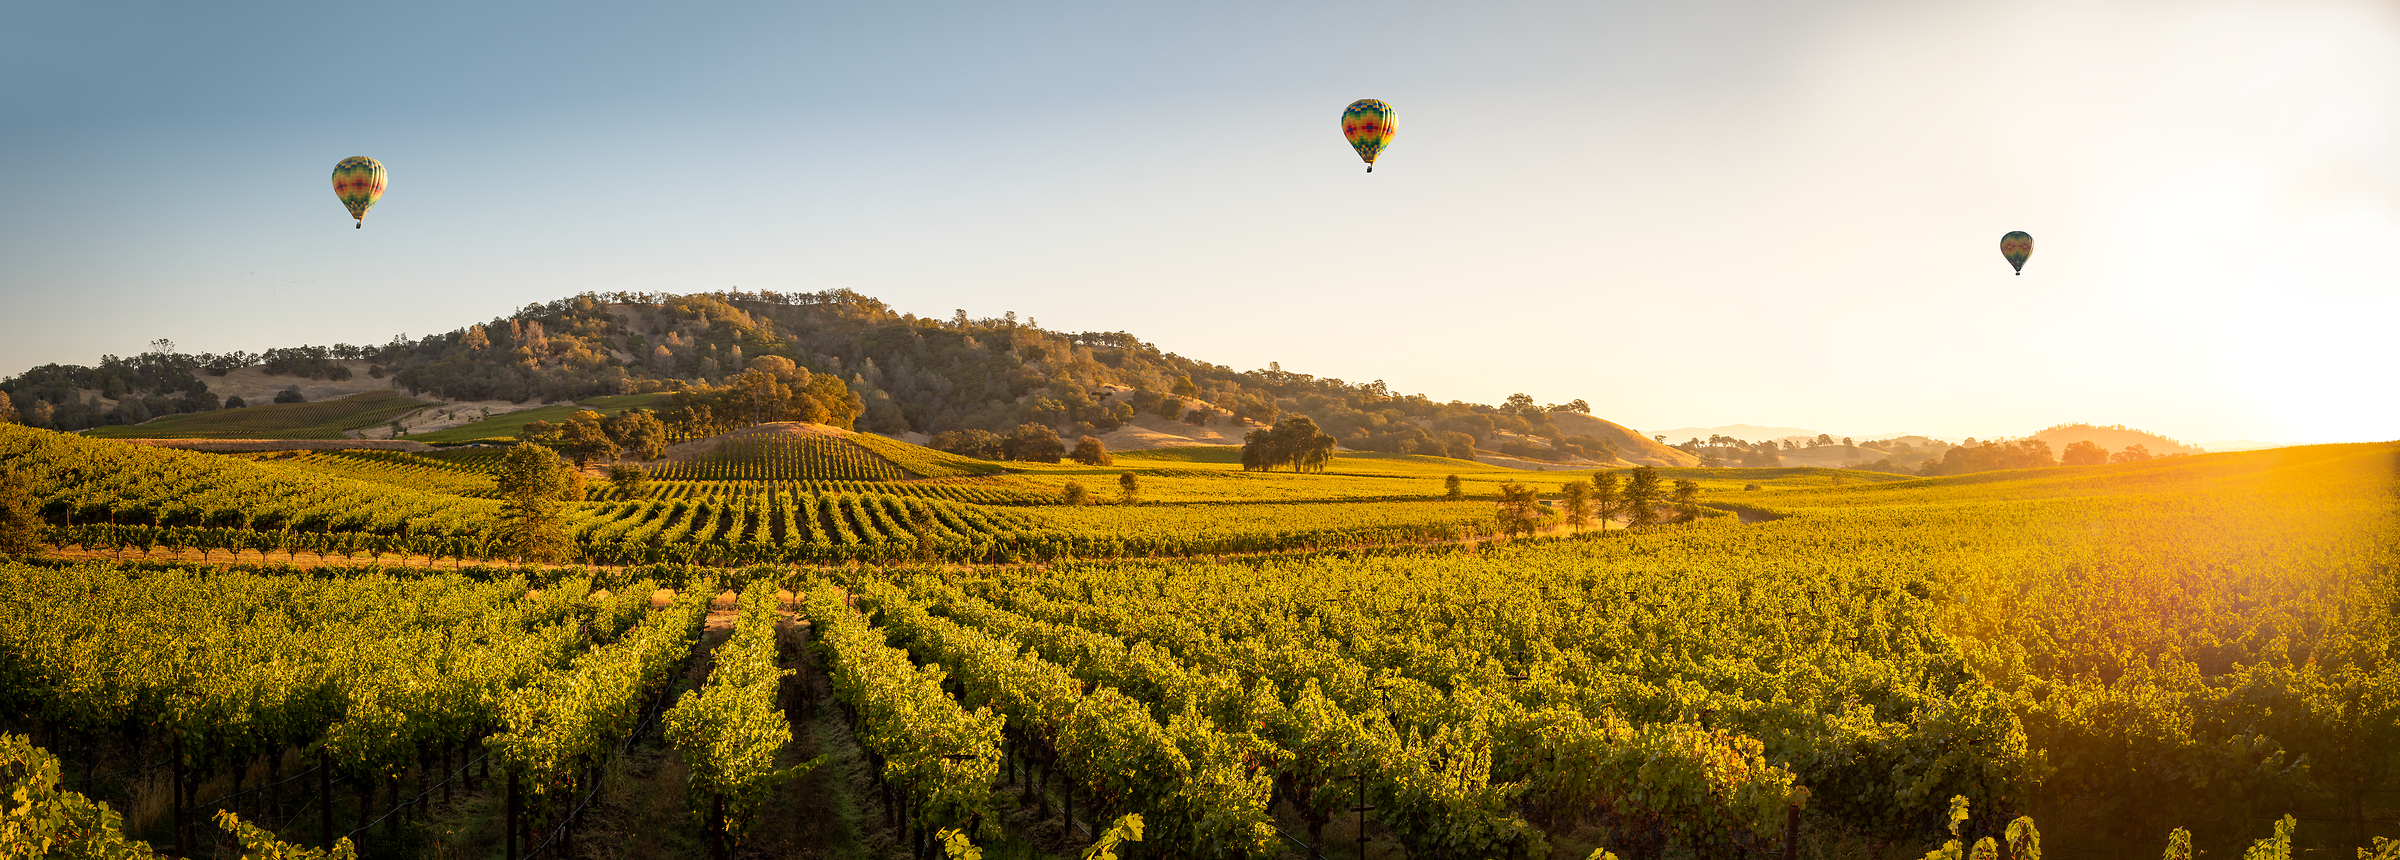 230 megapixels! A very high resolution, large-format VAST photo of a Napa Valley vineyard with hot air balloons and sunlight; landscape photo created by Justin Katz in Pope Valley, Napa Valley, California